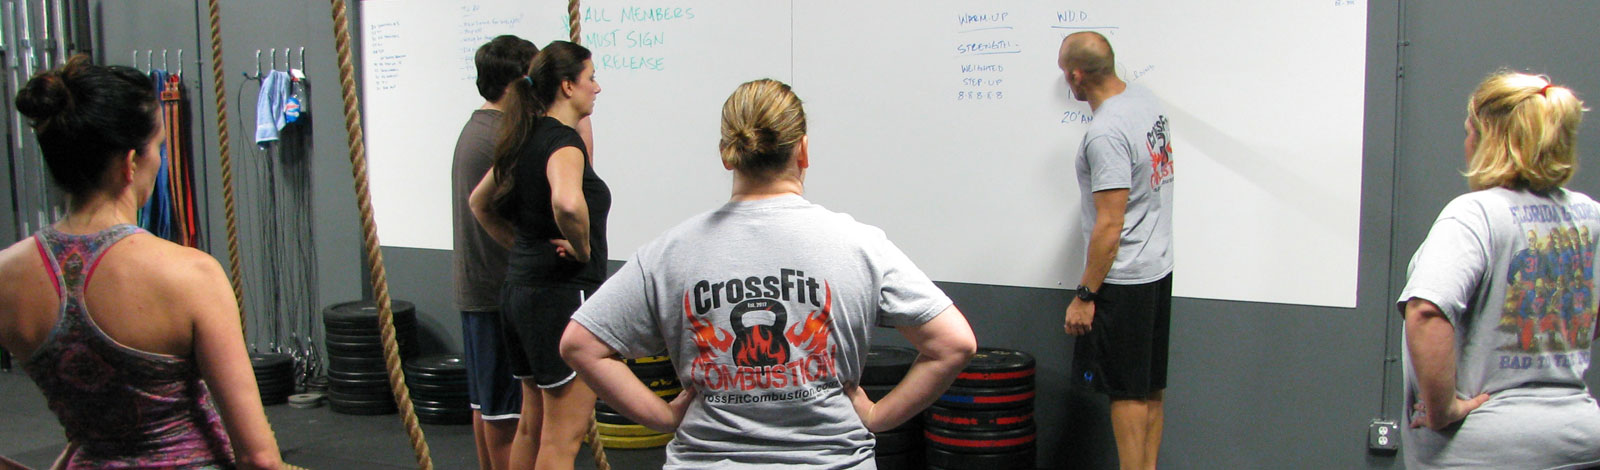 Crossfit Combustion Spring Hill Tn Forging Elite Fitness 4851